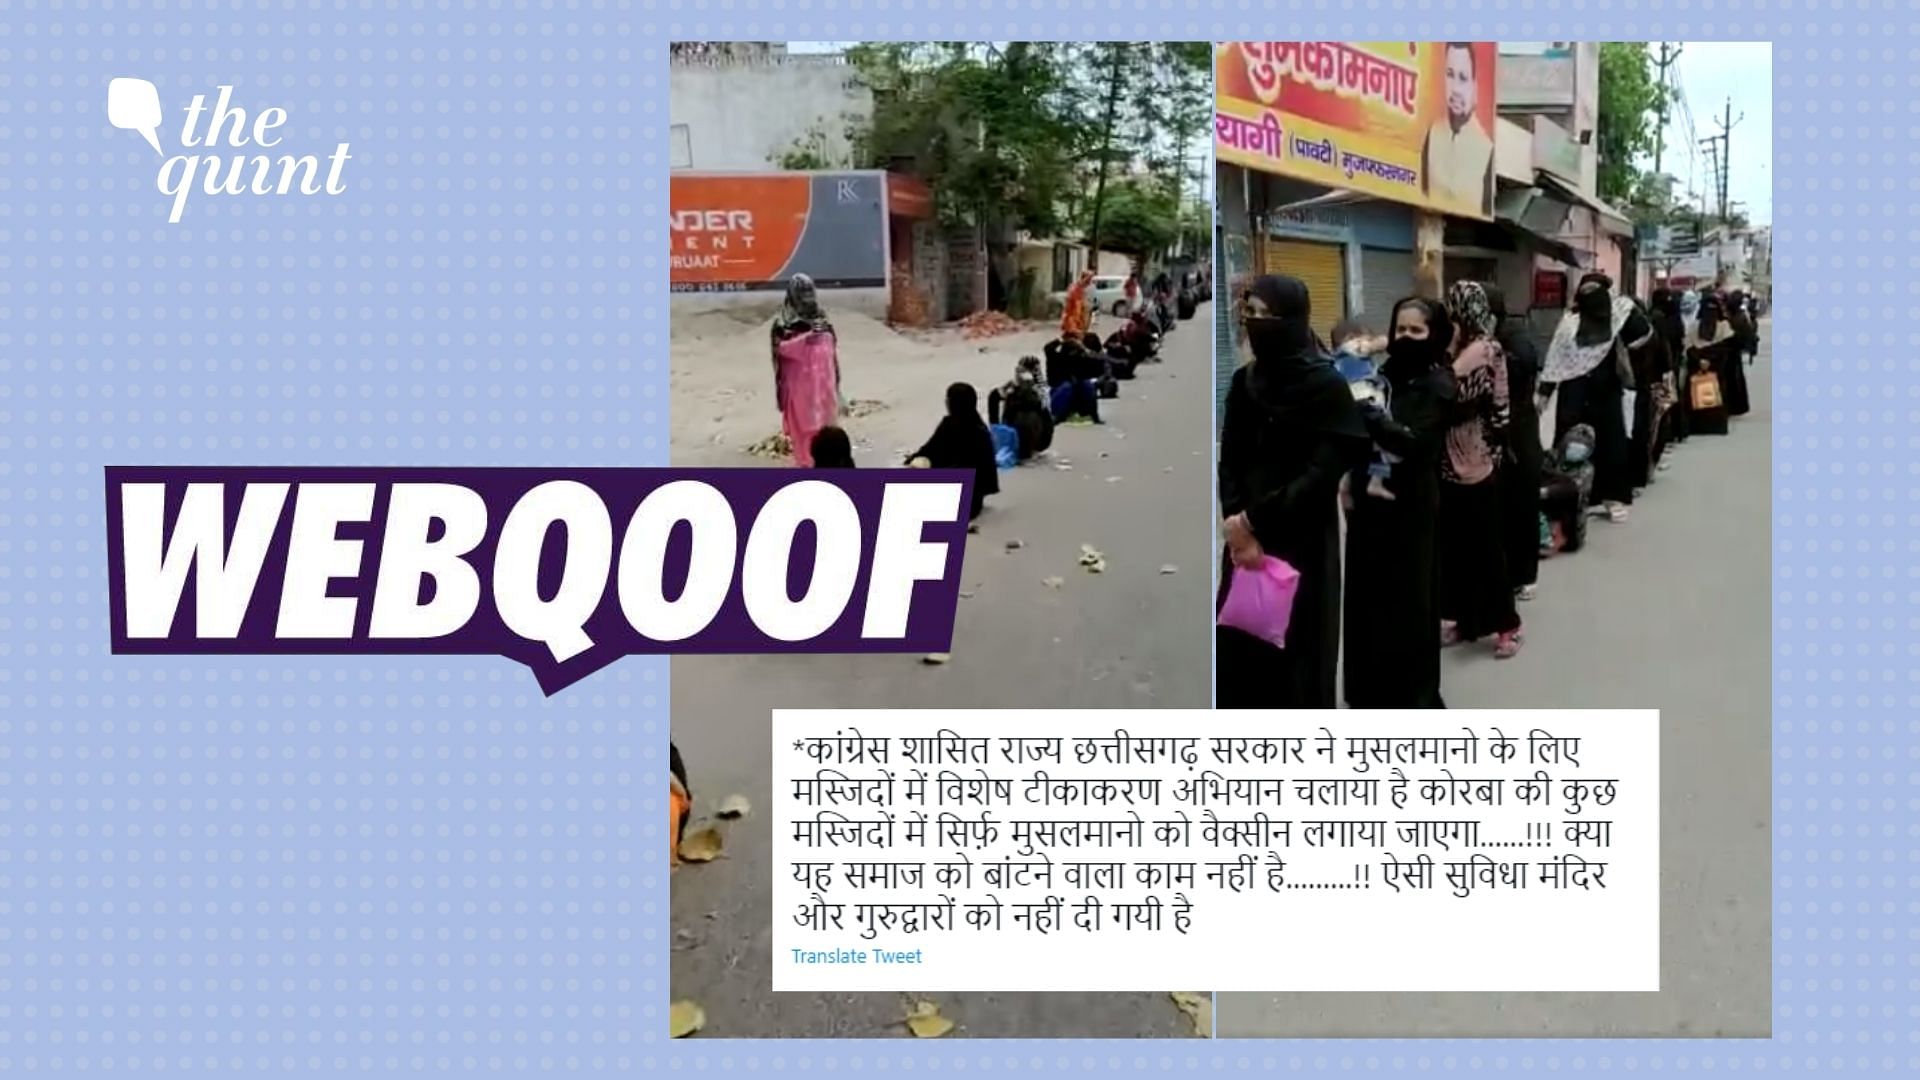 The 2020 clip is shared falsely claiming that Muslims are getting vaccinated in mosques in Korba, Chhattisgarh.